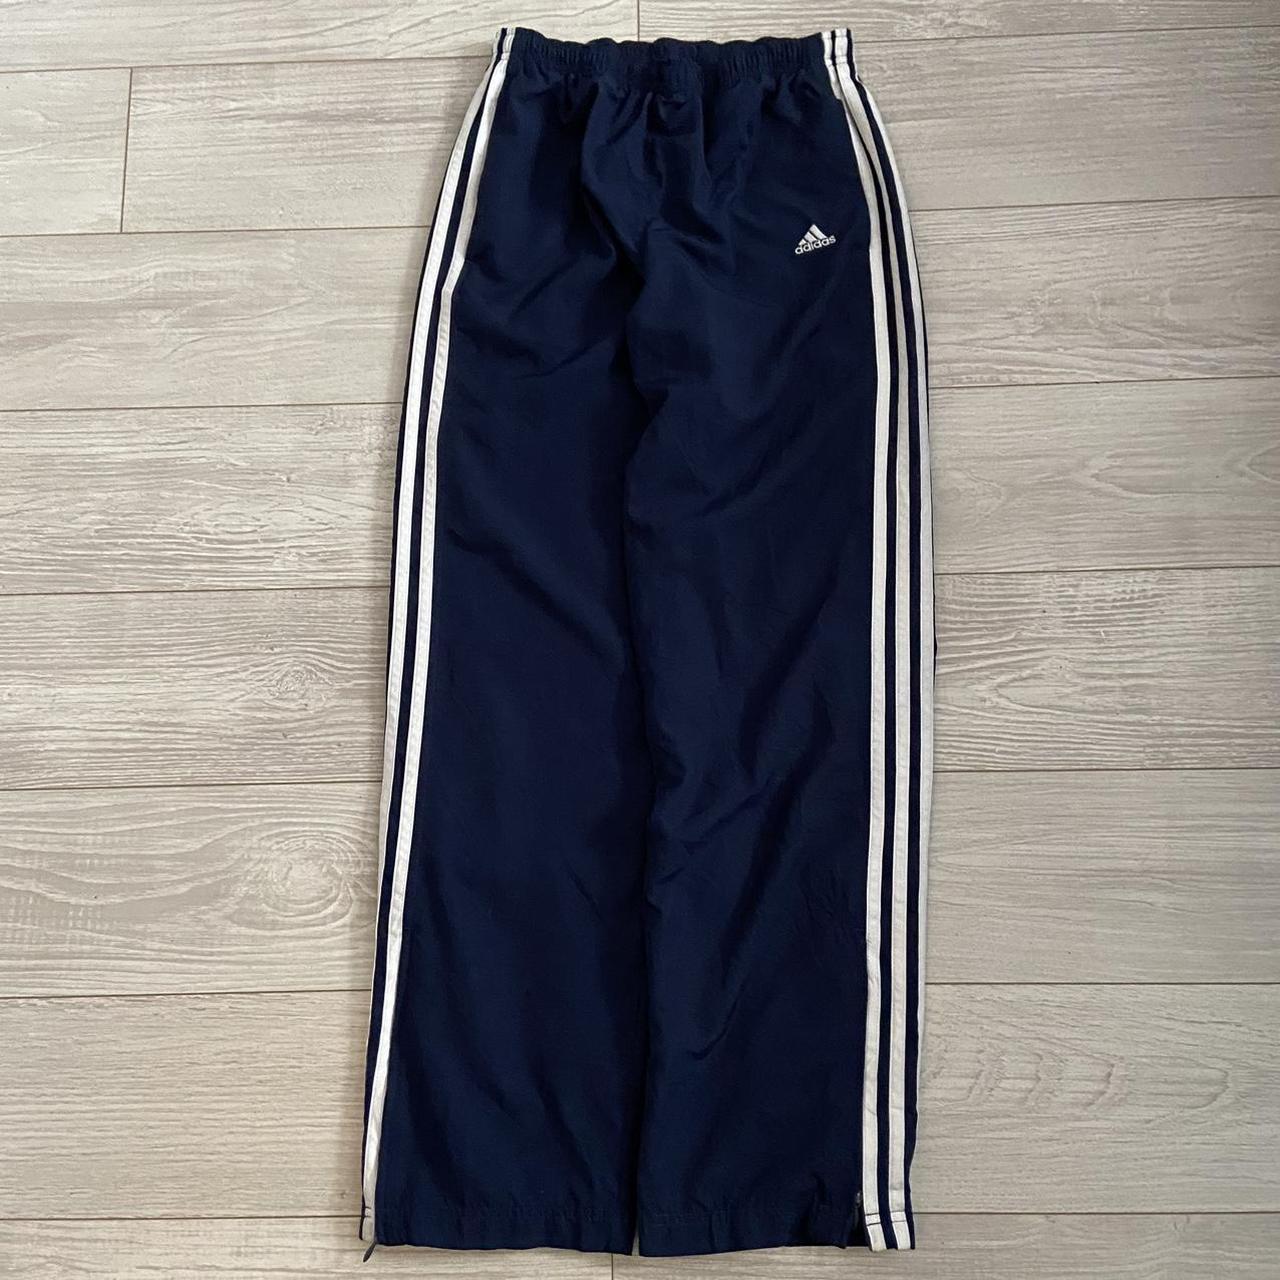 Vintage adidas track pants. Flawless condition. ... - Depop